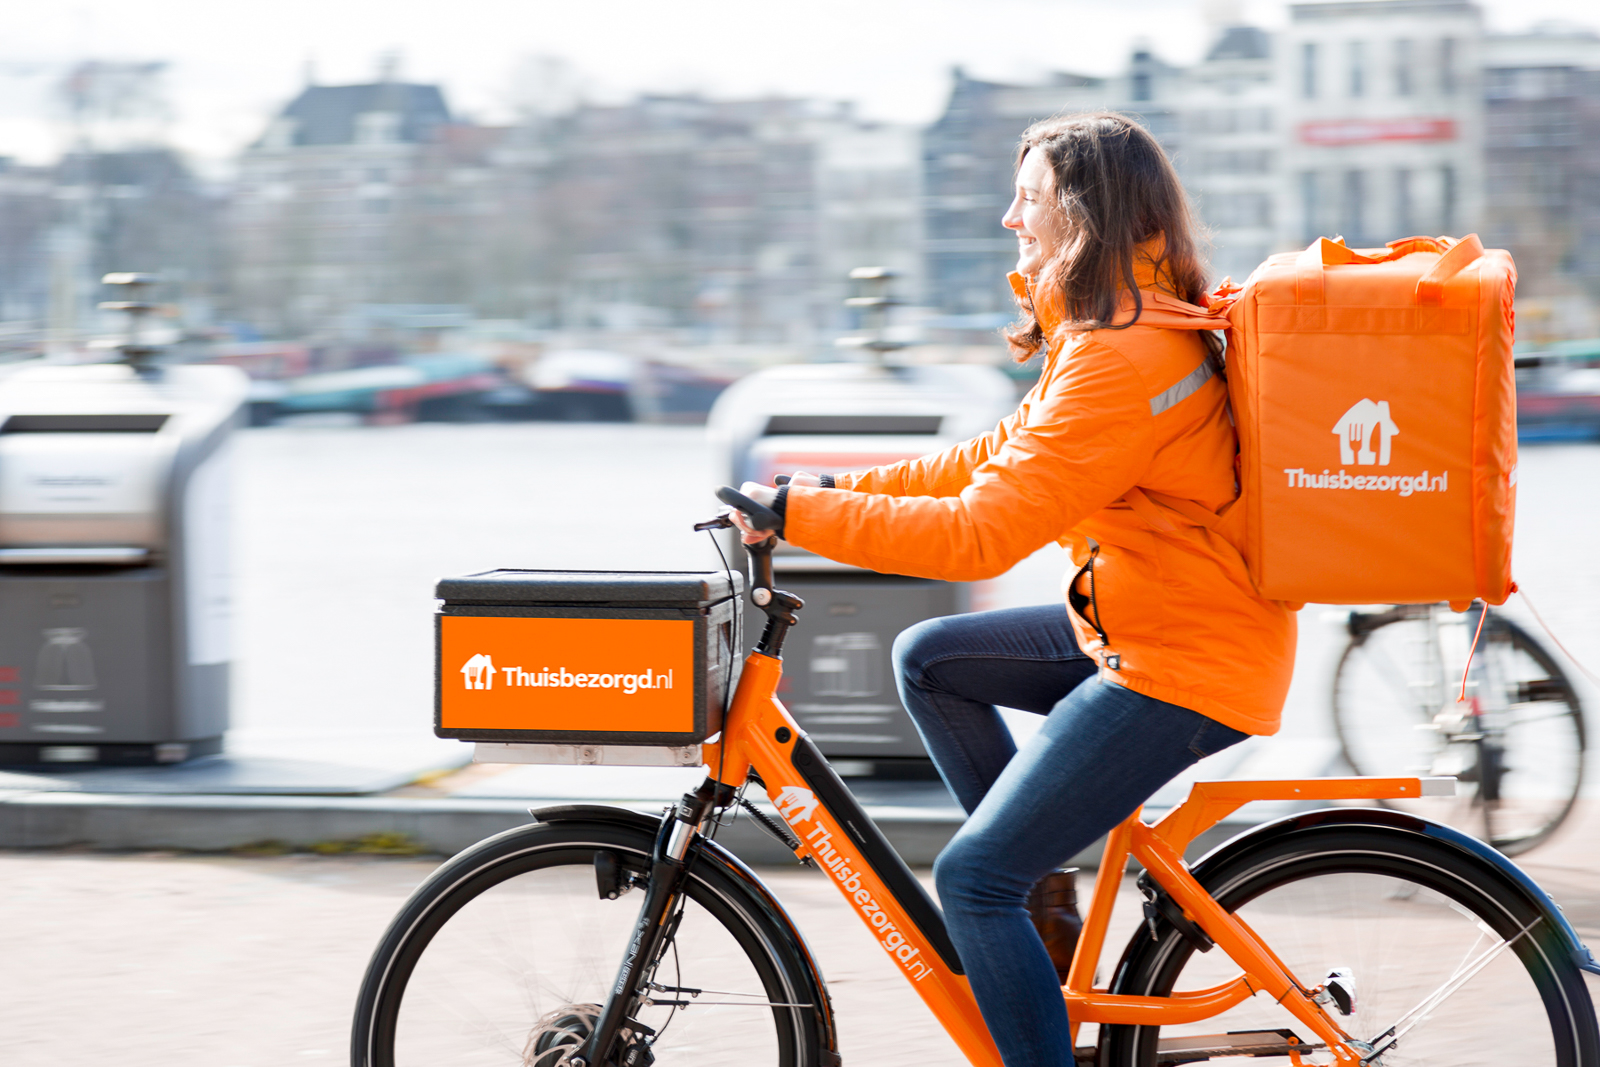 Takeaway.com buys three German delivery services for €930m - DutchNews.nl